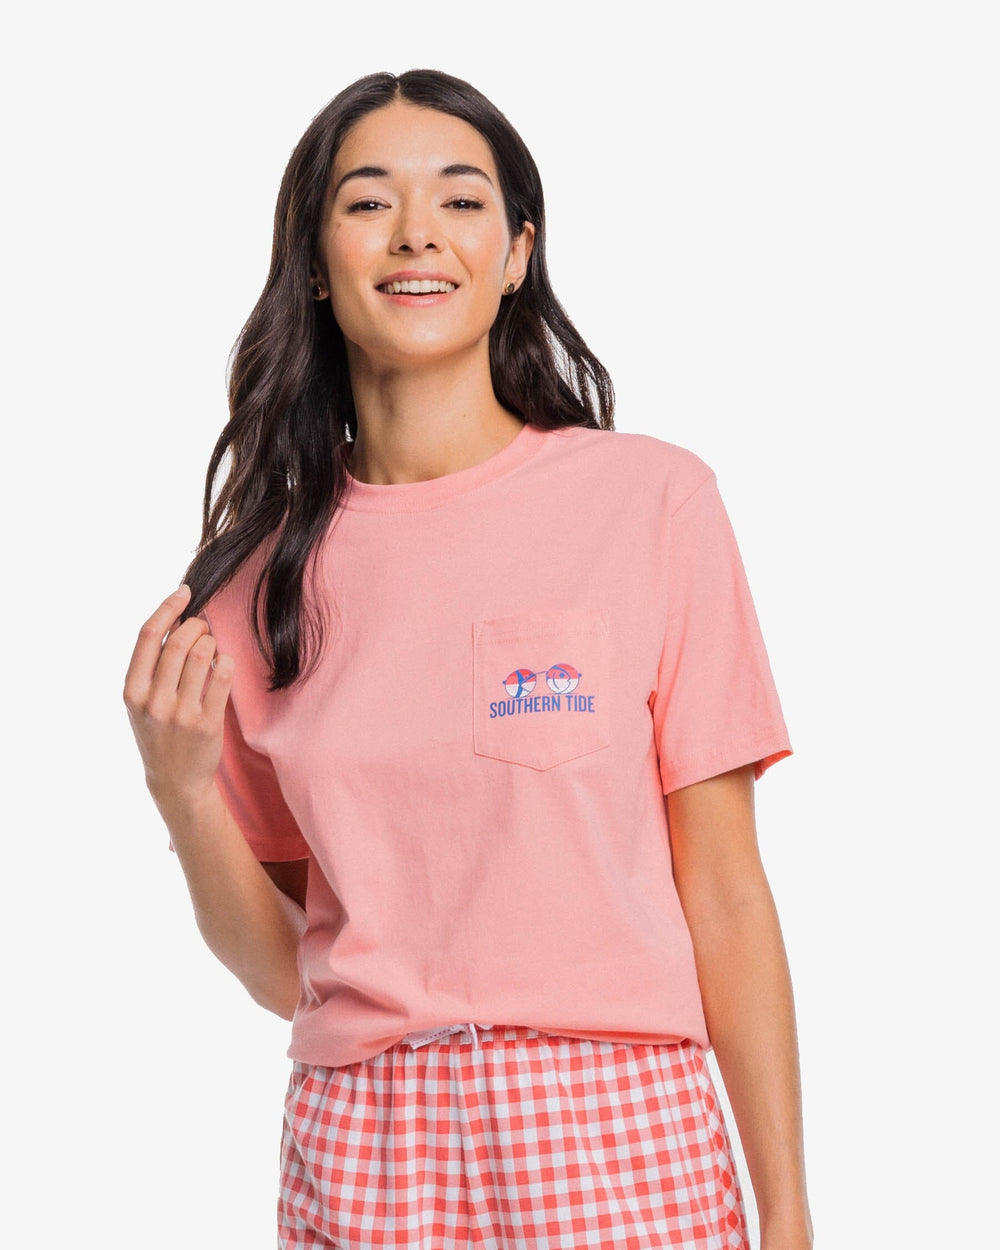 The front view of the Southern Tide Sunglasses and Sunsets T-Shirt by Southern Tide - Flamingo Pink